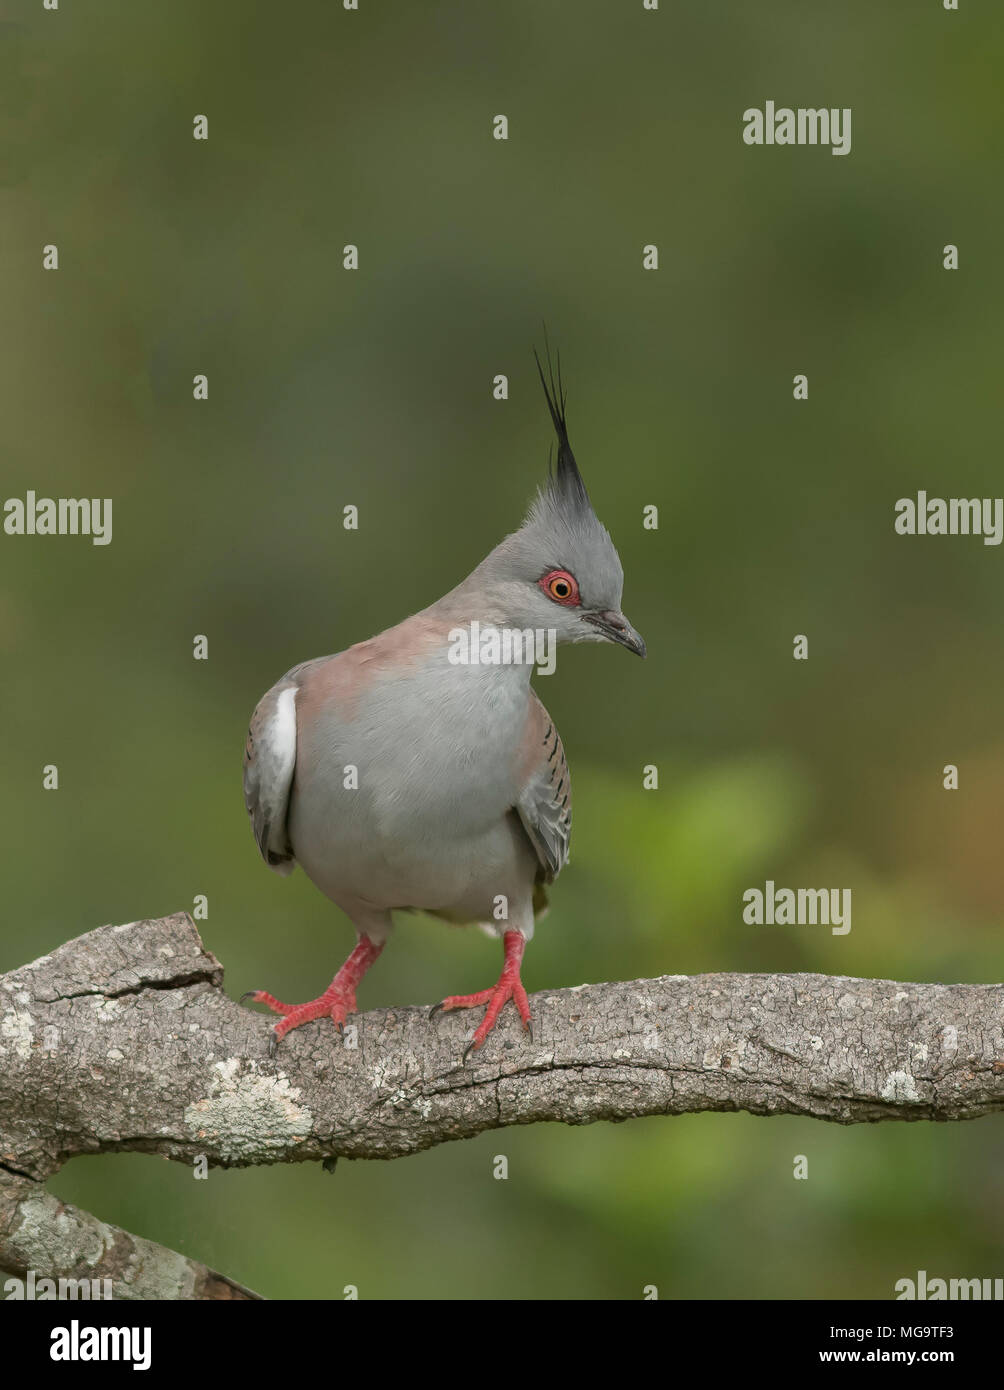 Australian Crested Pigeon found in most parts of Australia. Stock Photo